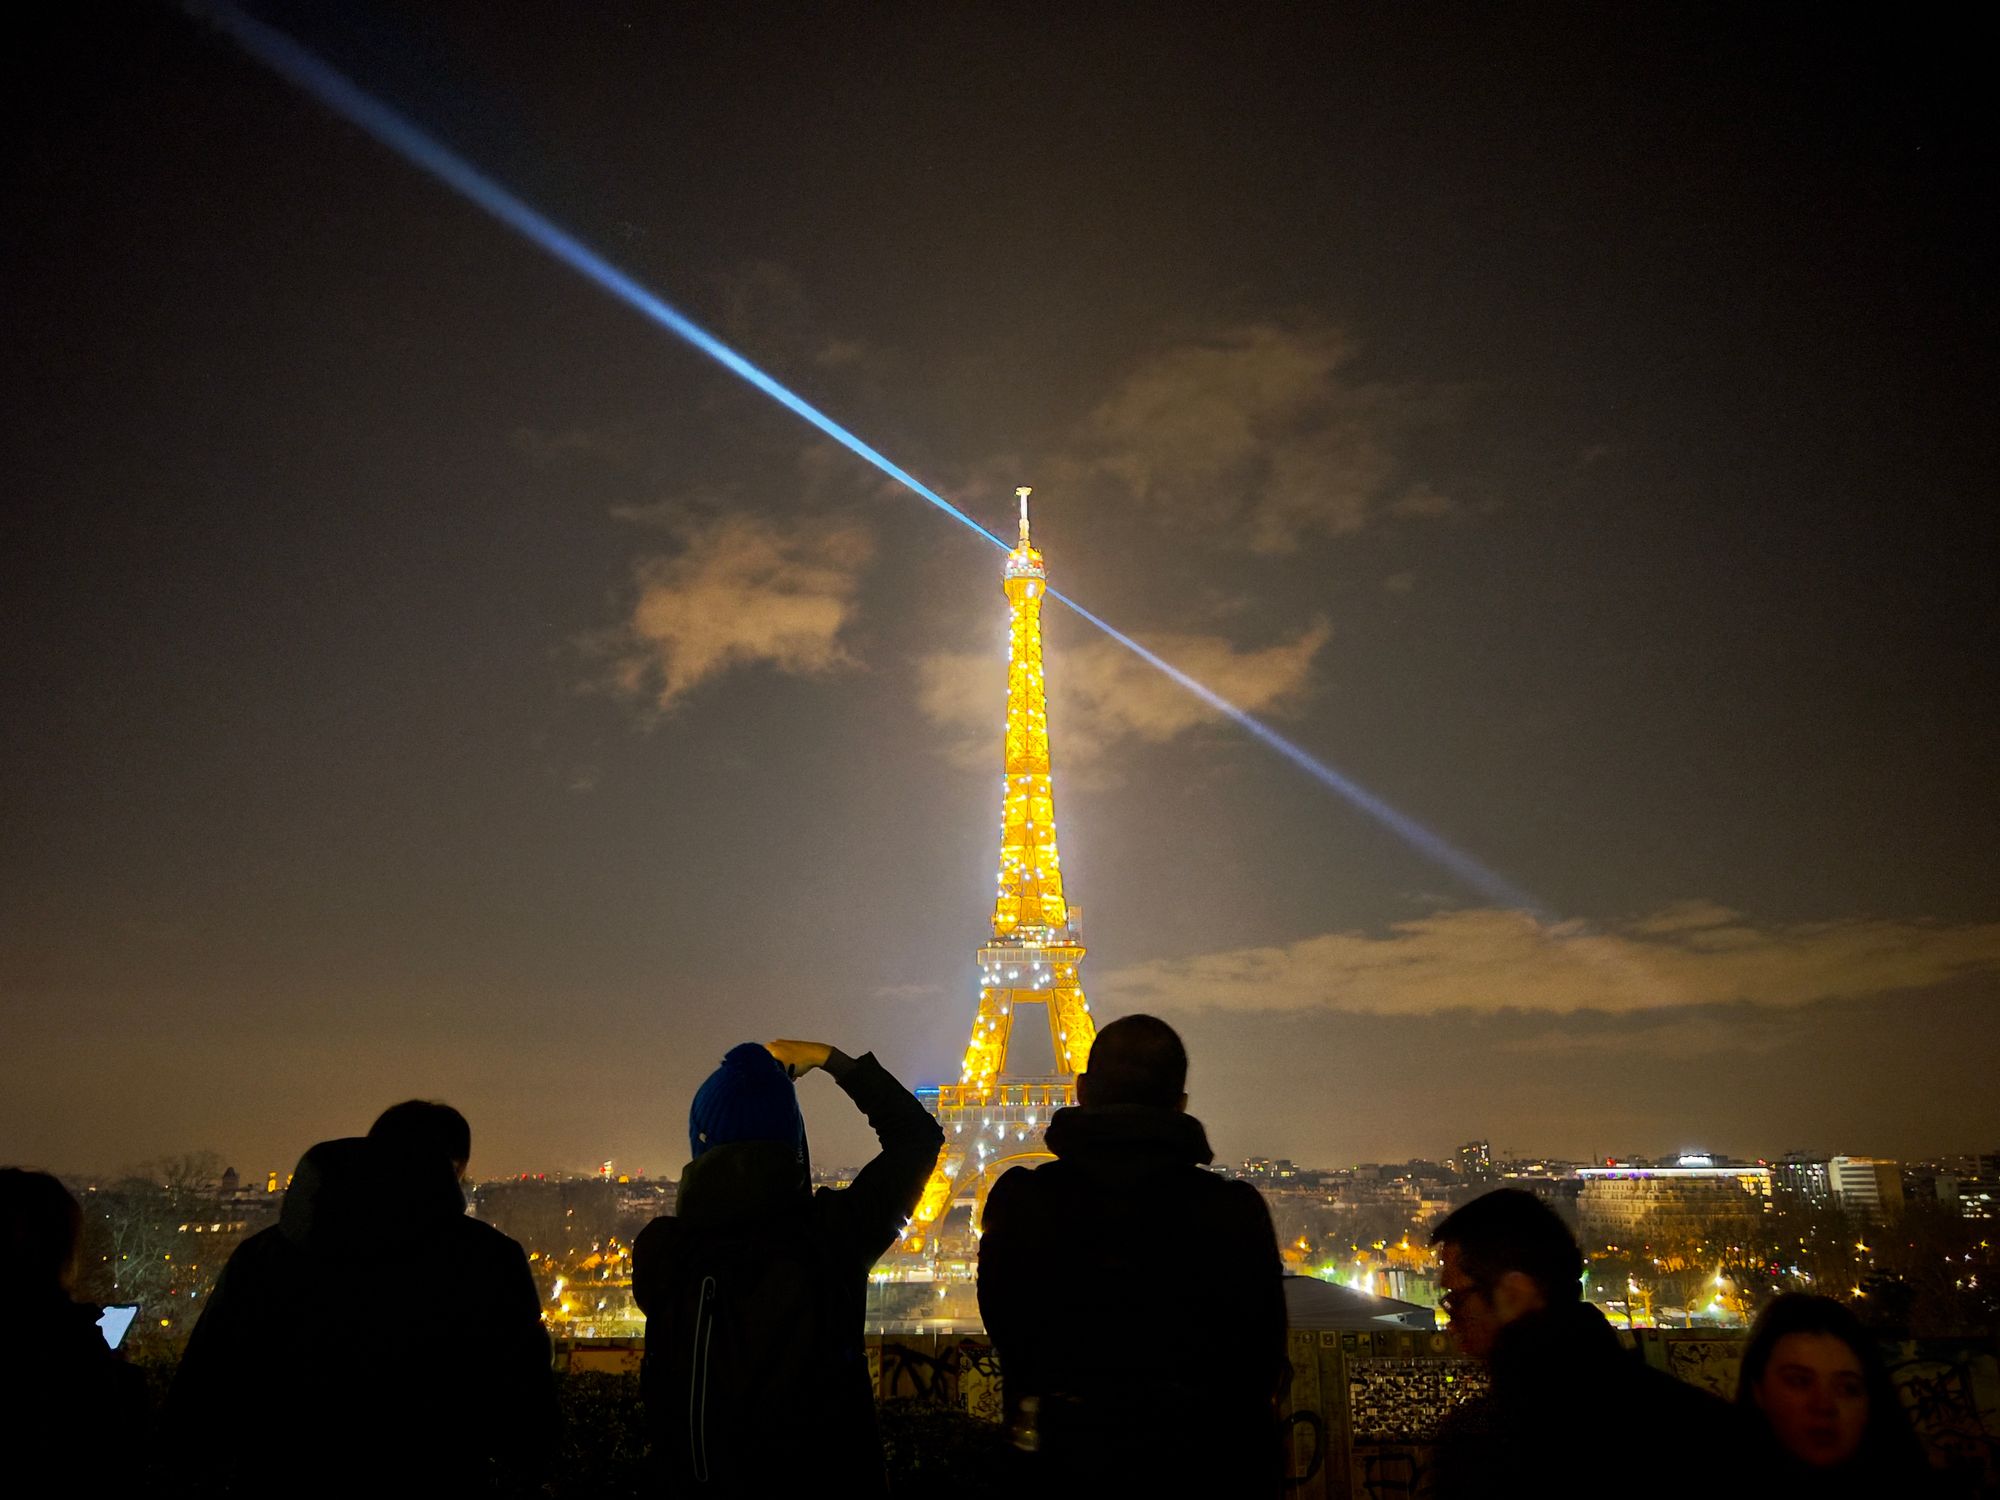 The Eiffel Tower lit up with sparkles at night with its searchlight swinging through the sky. People take photos in the foreground.